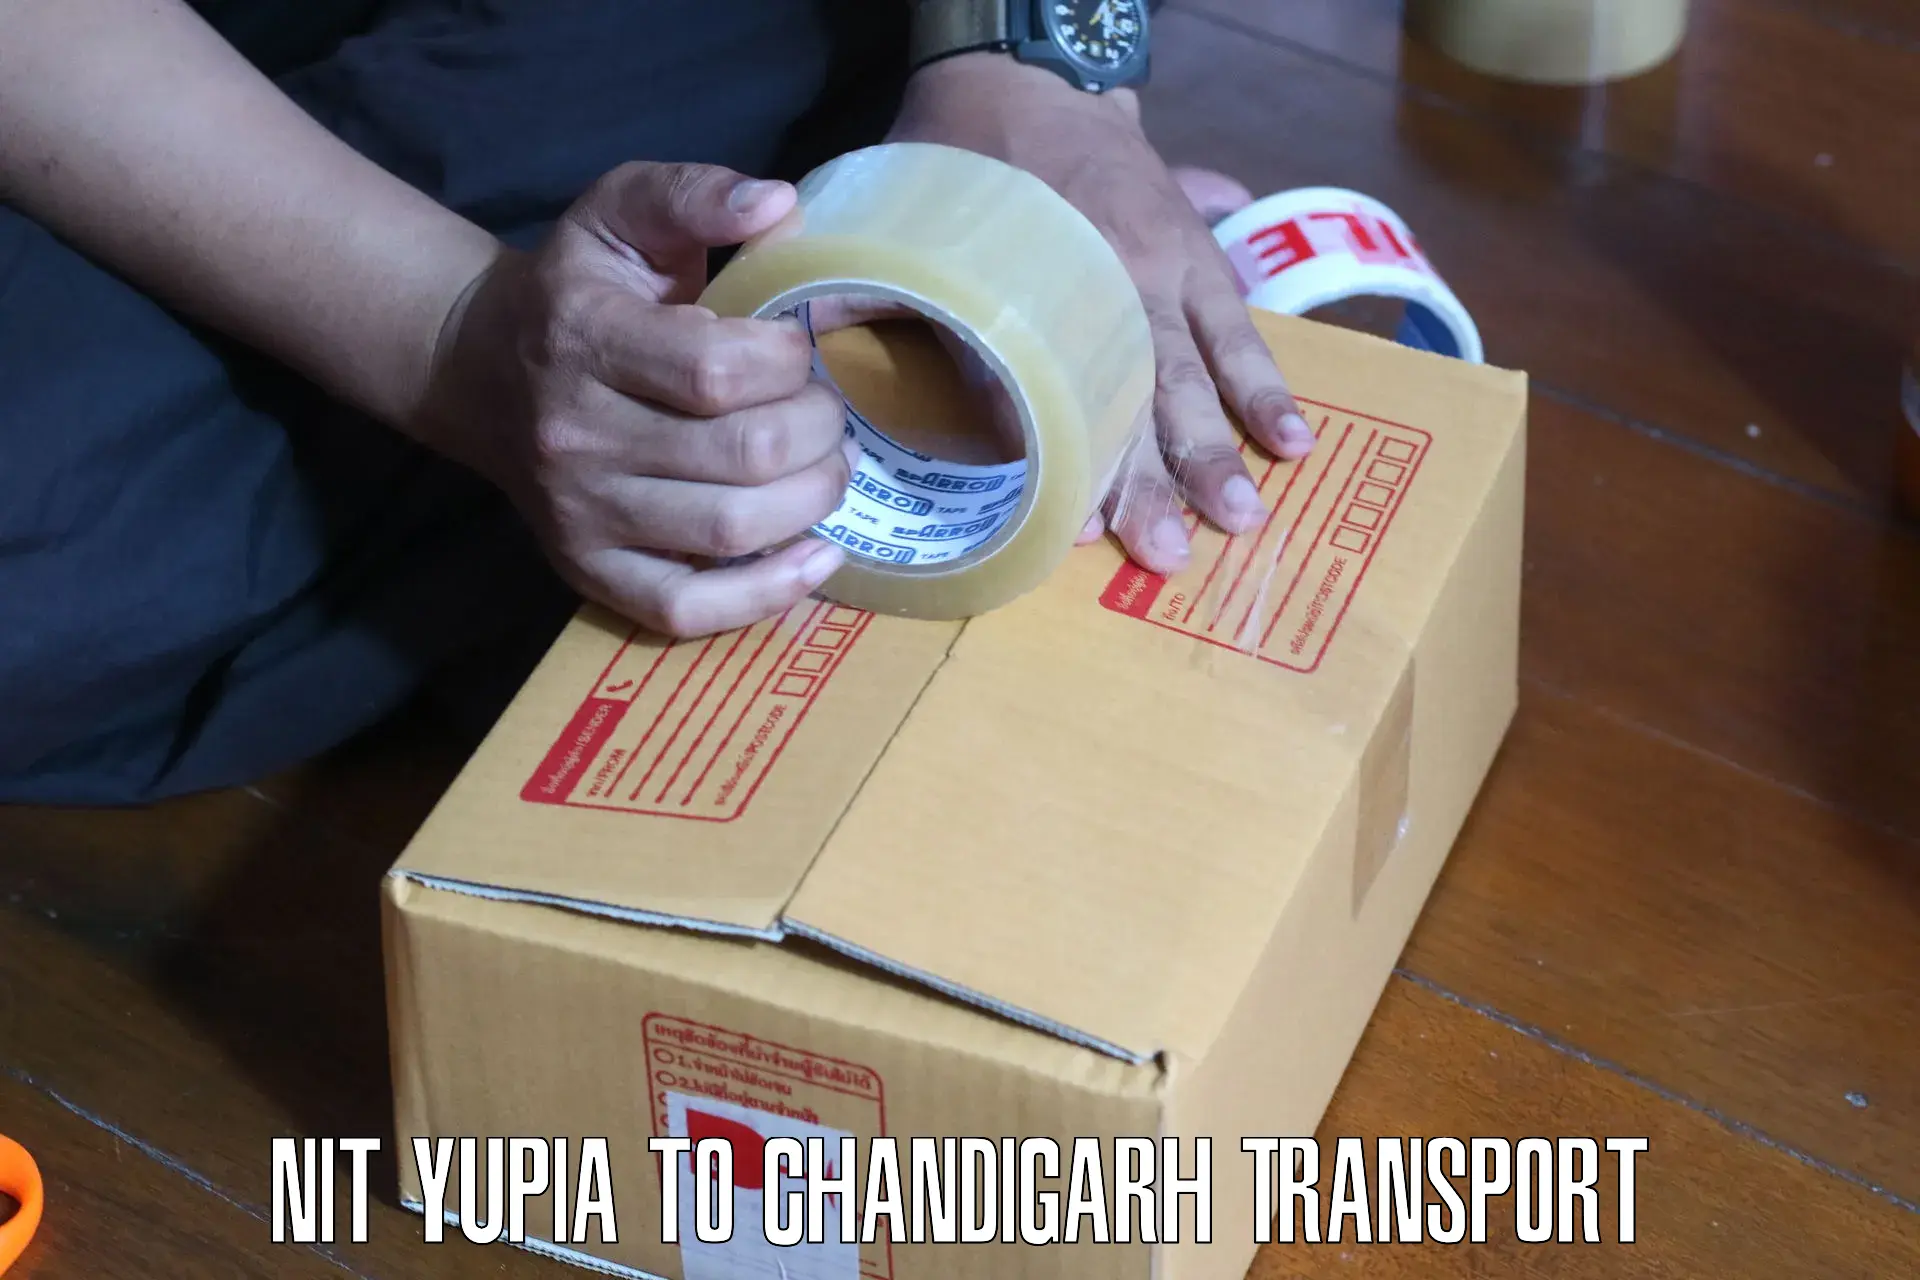 Cargo transport services NIT Yupia to Chandigarh